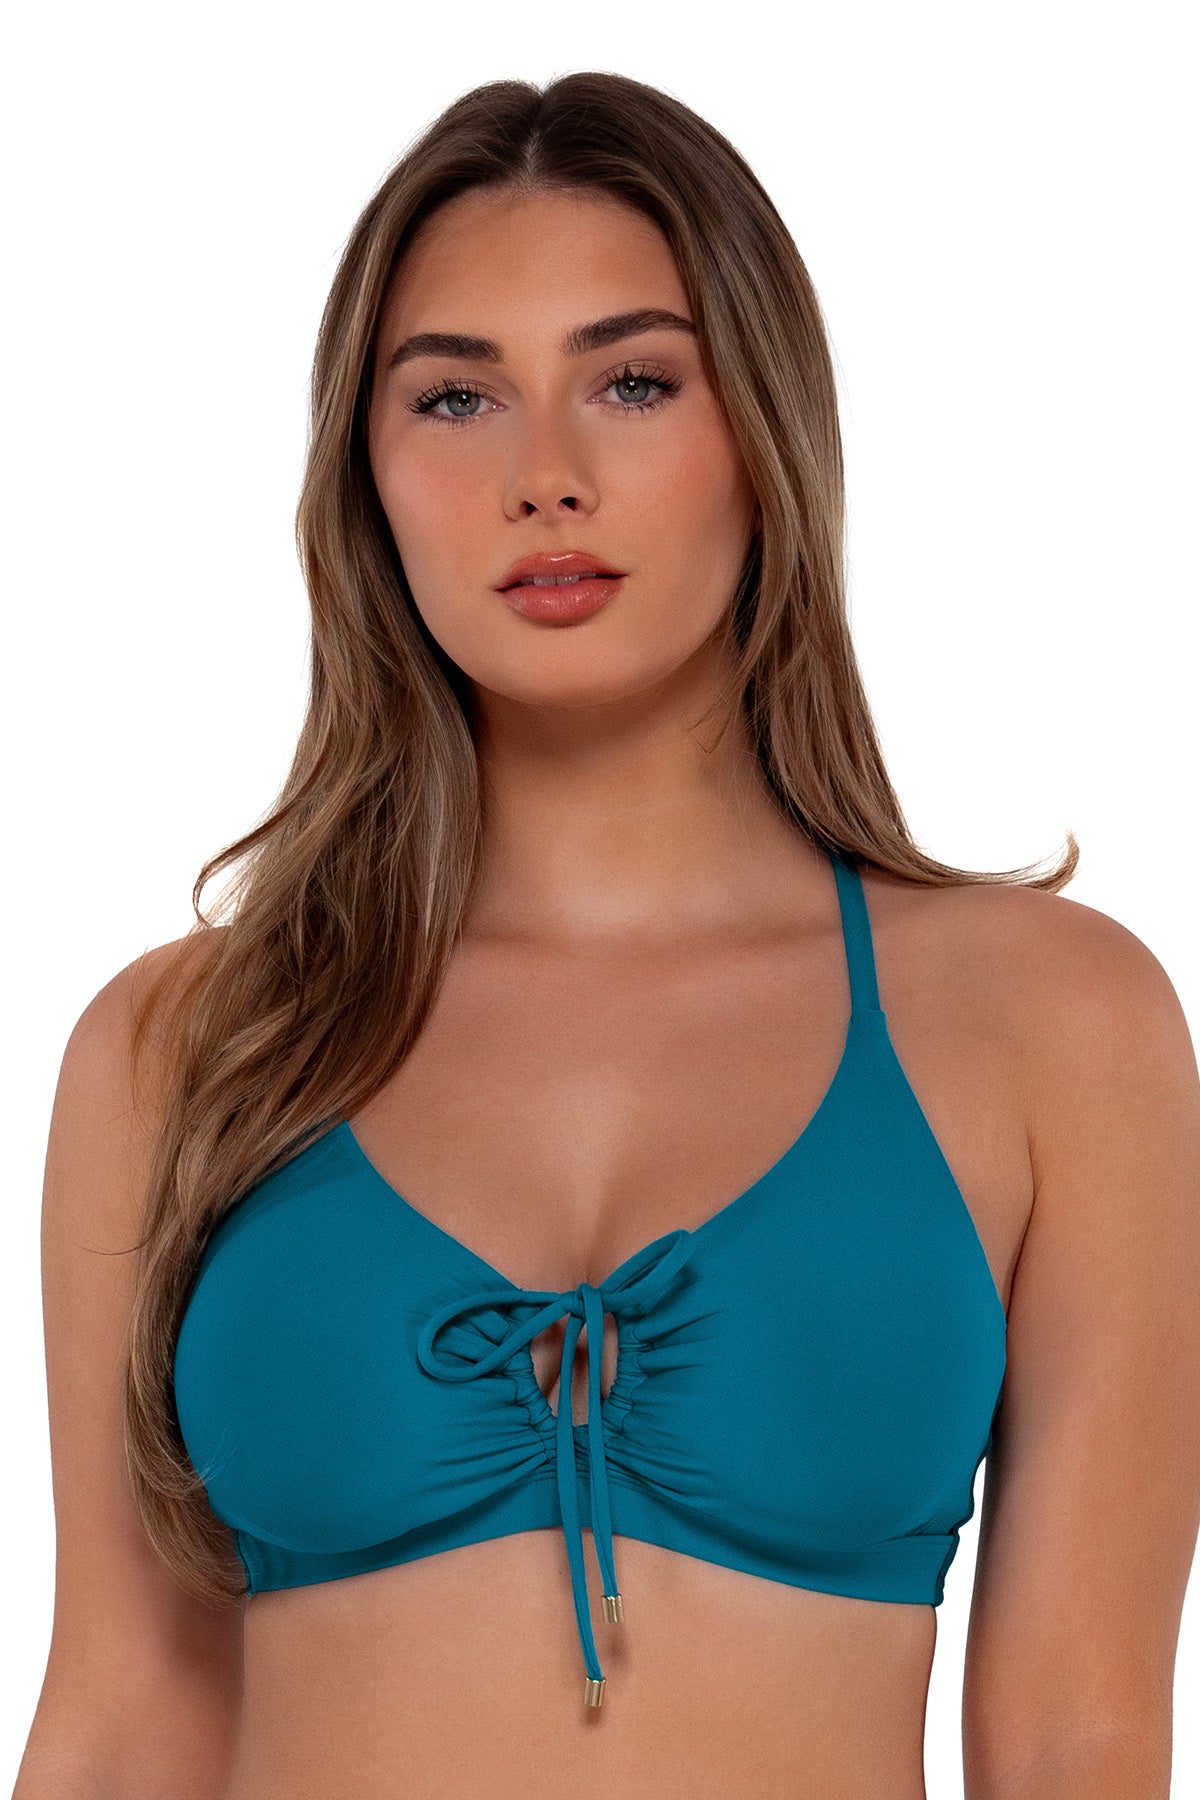 Front pose #1 of Taylor wearing Sunsets Avalon Teal Kauai Keyhole Top